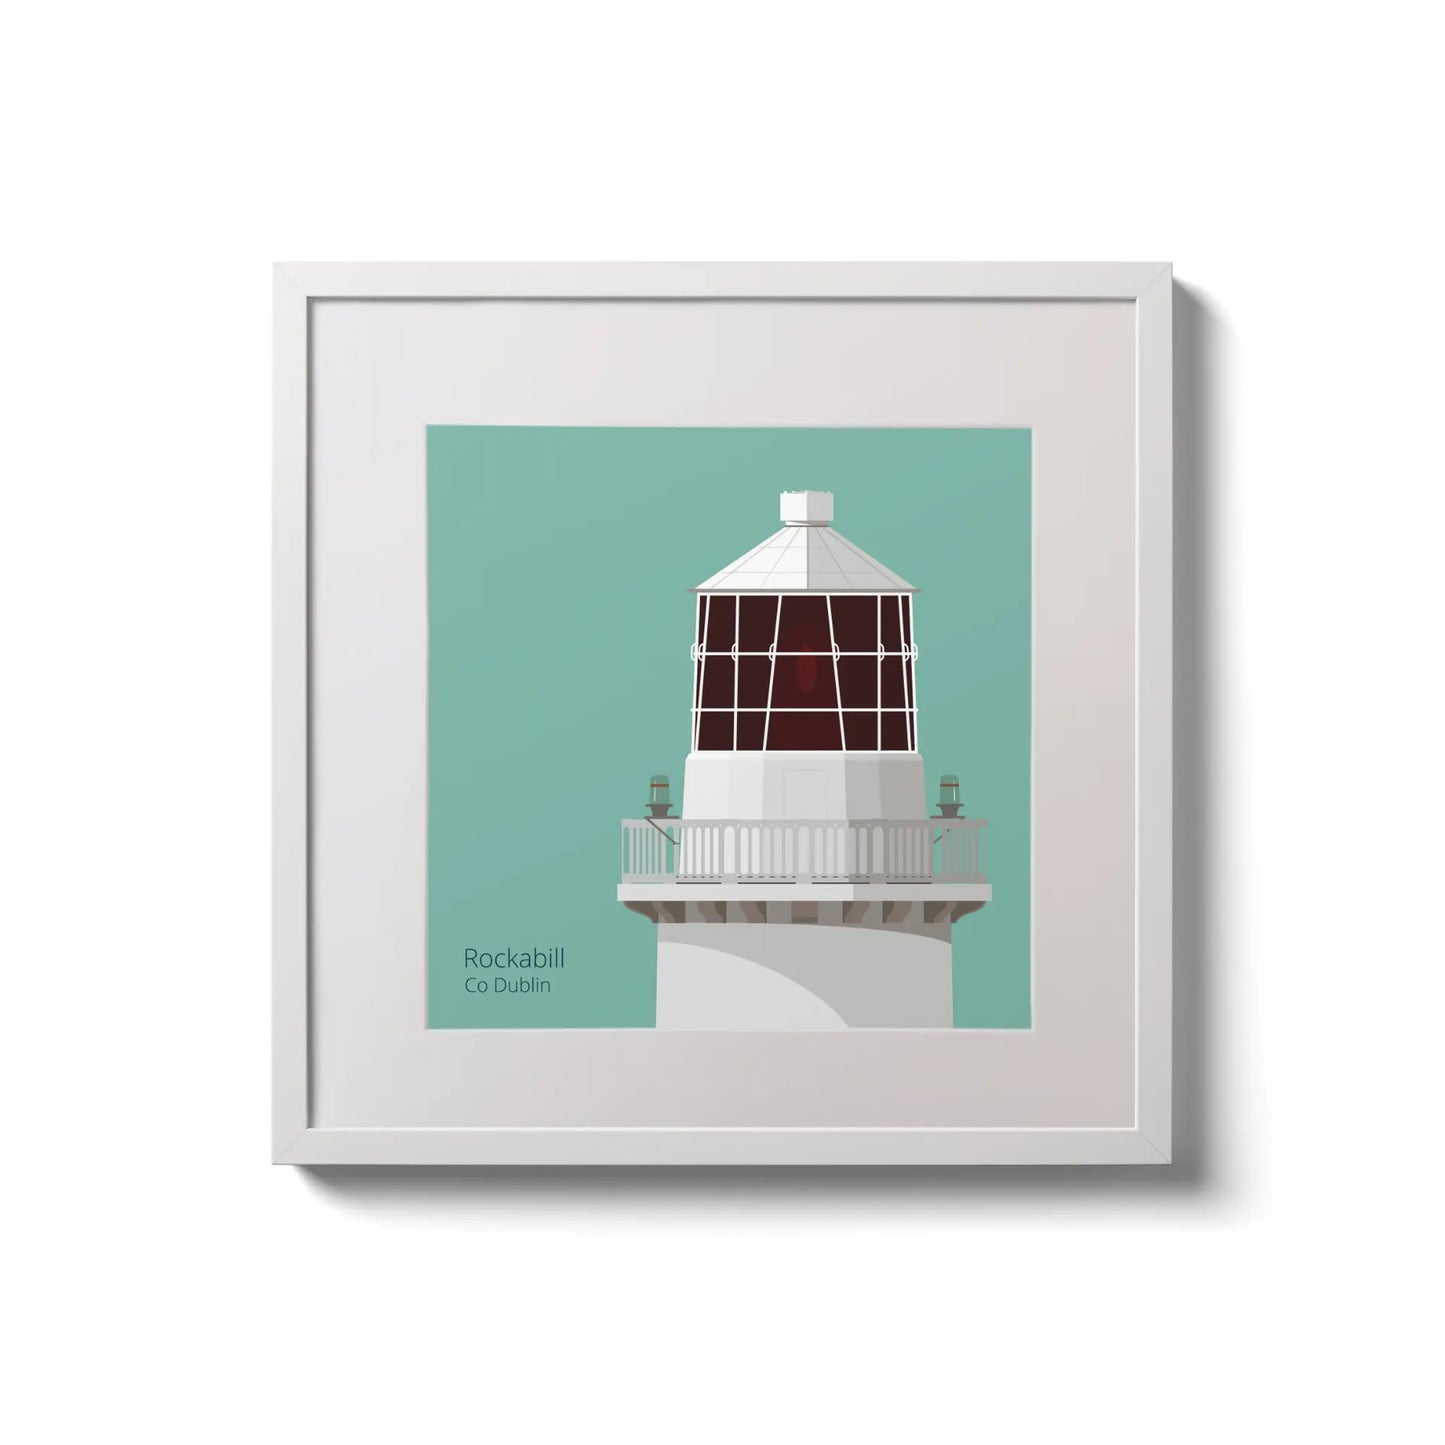 Illustration of Rockabill lighthouse on an ocean green background,  in a white square frame measuring 20x20cm.